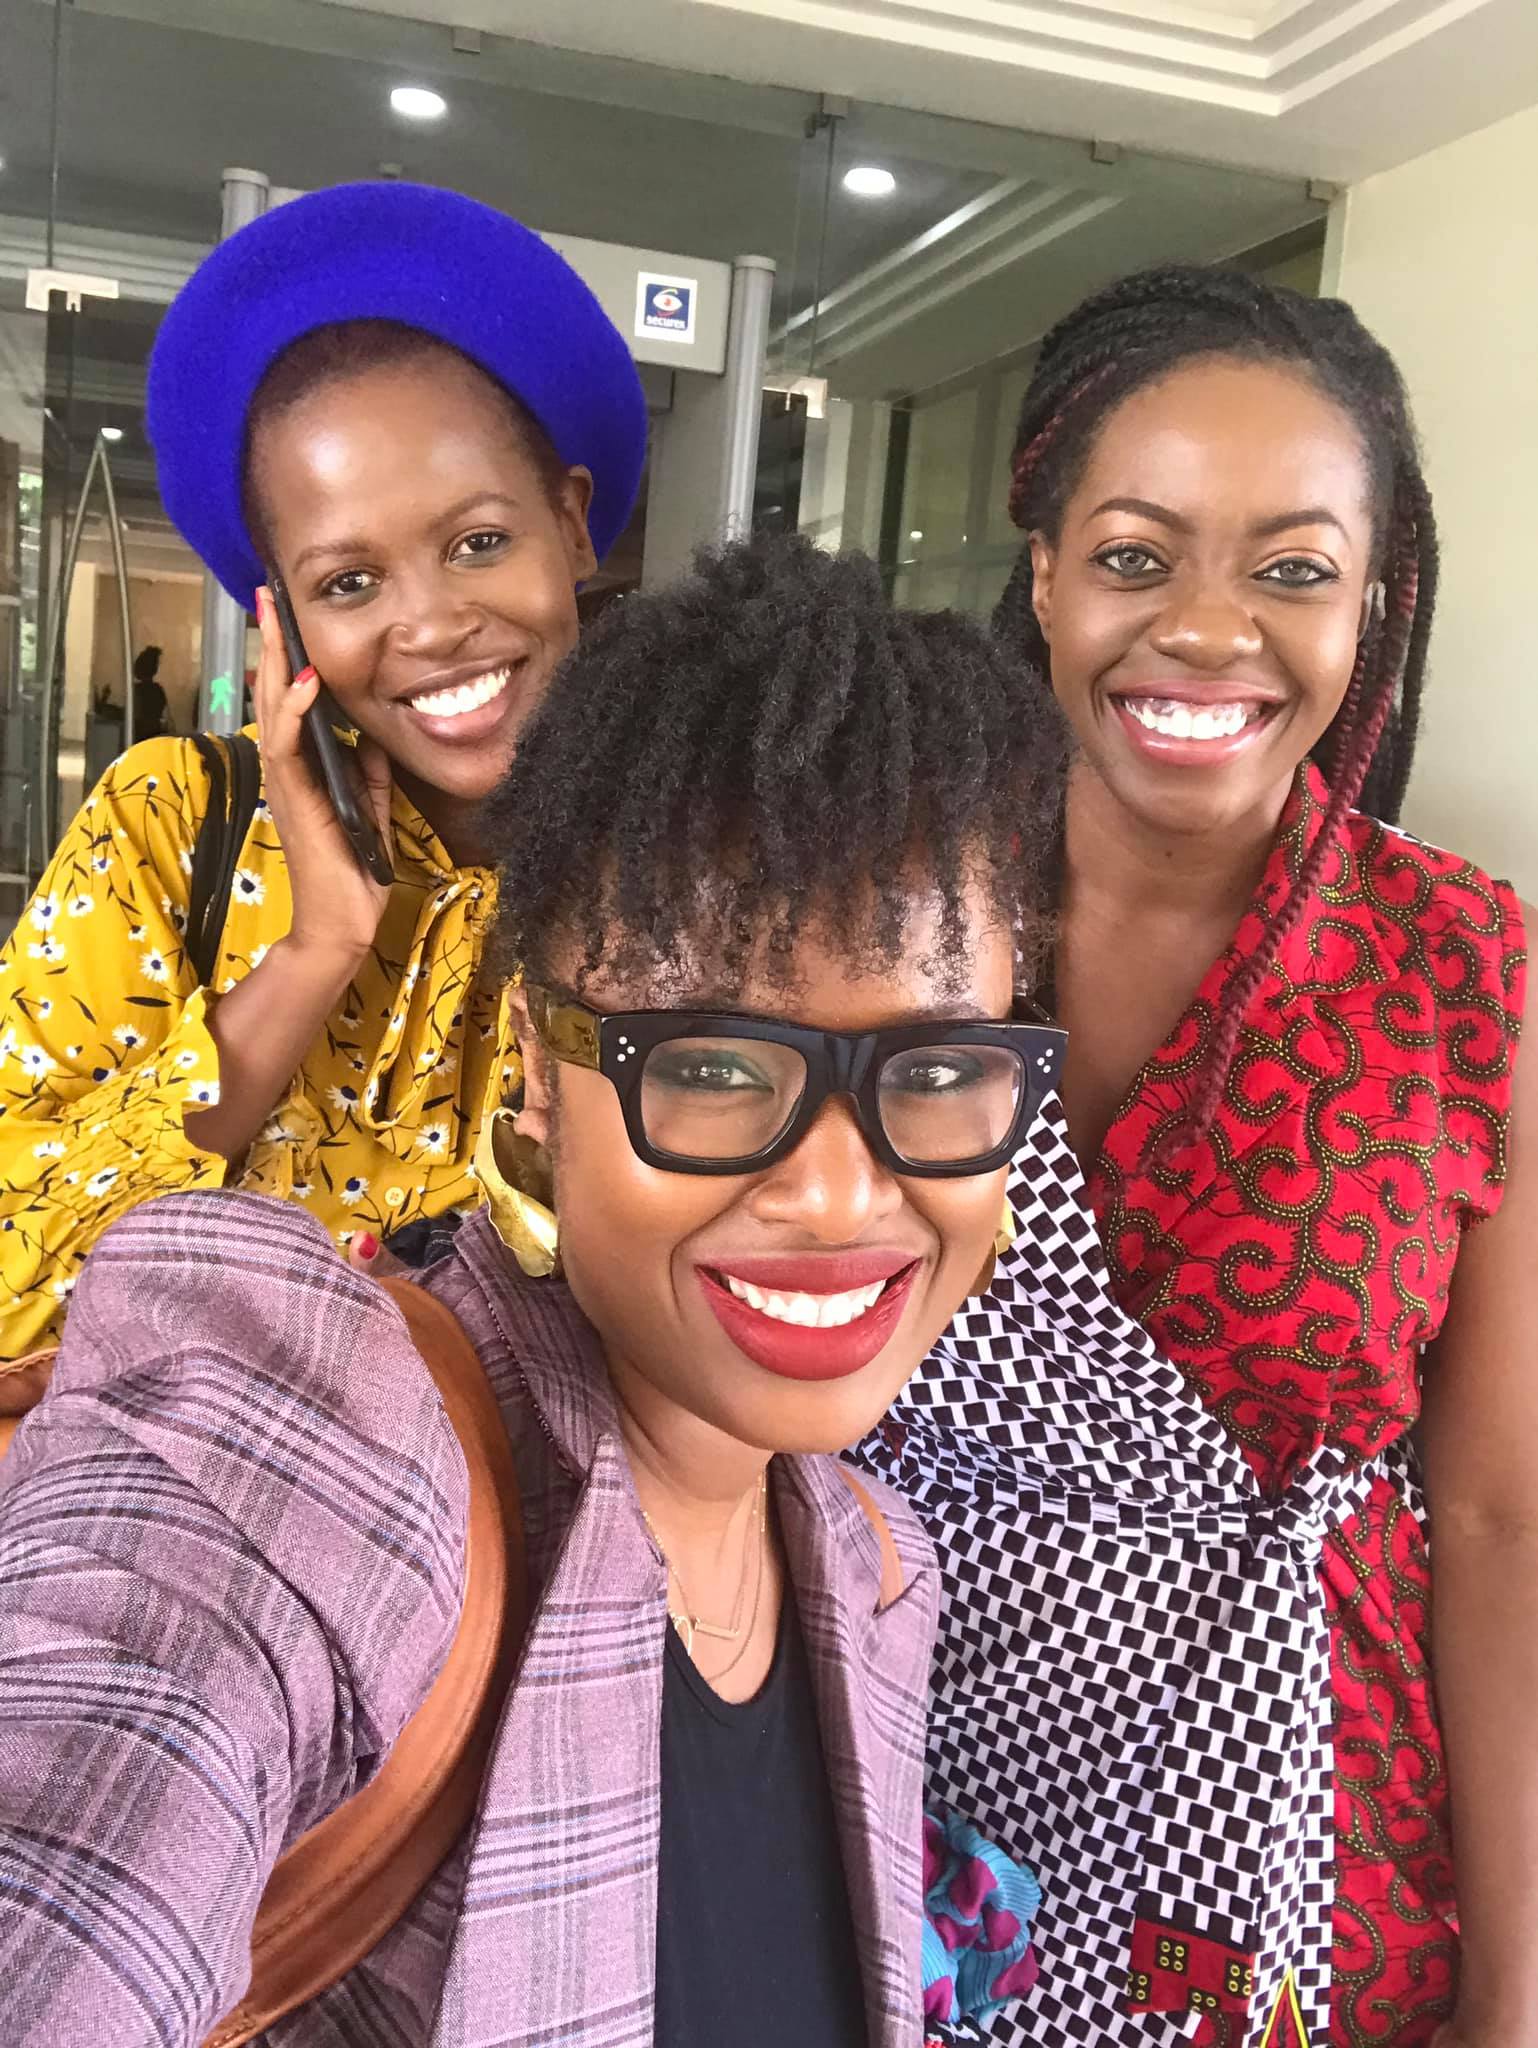  mandatory selfie post The She Word filming at BBC Africa with Mandy Amandine and Sade Ladipo. I was the first guest ever from Sierra Leone on the show. Gladly set the bar all the way high. 